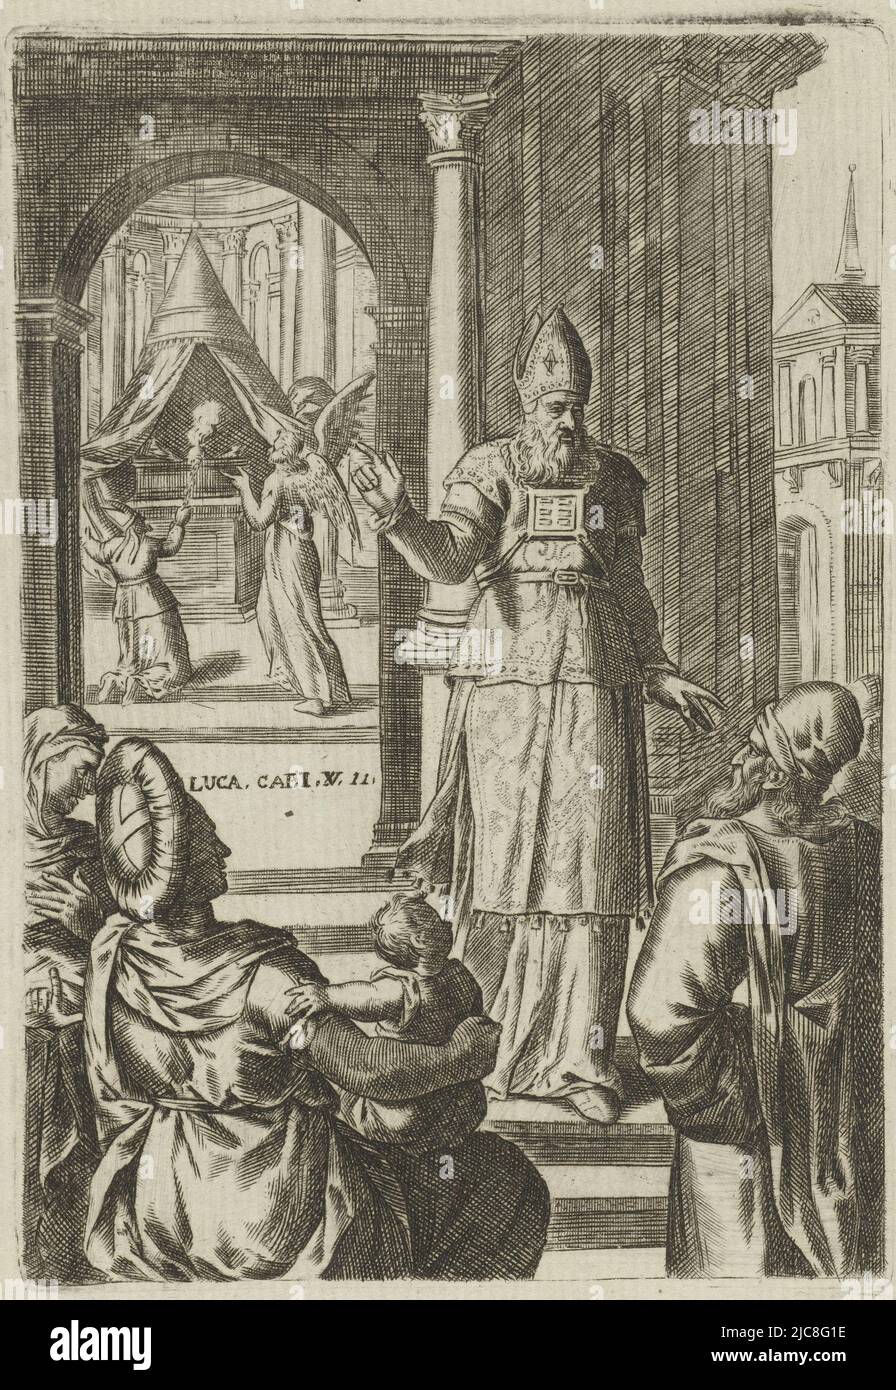 Book illustration accompanying the story of the announcement of the birth of John (Luke 1:5-23). In the background, Zacharias is visited by an angel in the temple during the incense offering. The angel tells him that he will have a son named John. Next, Zacharias comes outside the temple (foreground). He tries to address the crowd, but is unable to speak due to the miracle. He makes do with gestures. The print contains a reference to the accompanying Bible passage, Annunciation of the Birth of John Scenes from the Bible Biblia sacra , print maker: Abraham de Bruyn, Crispijn van den Broeck Stock Photo